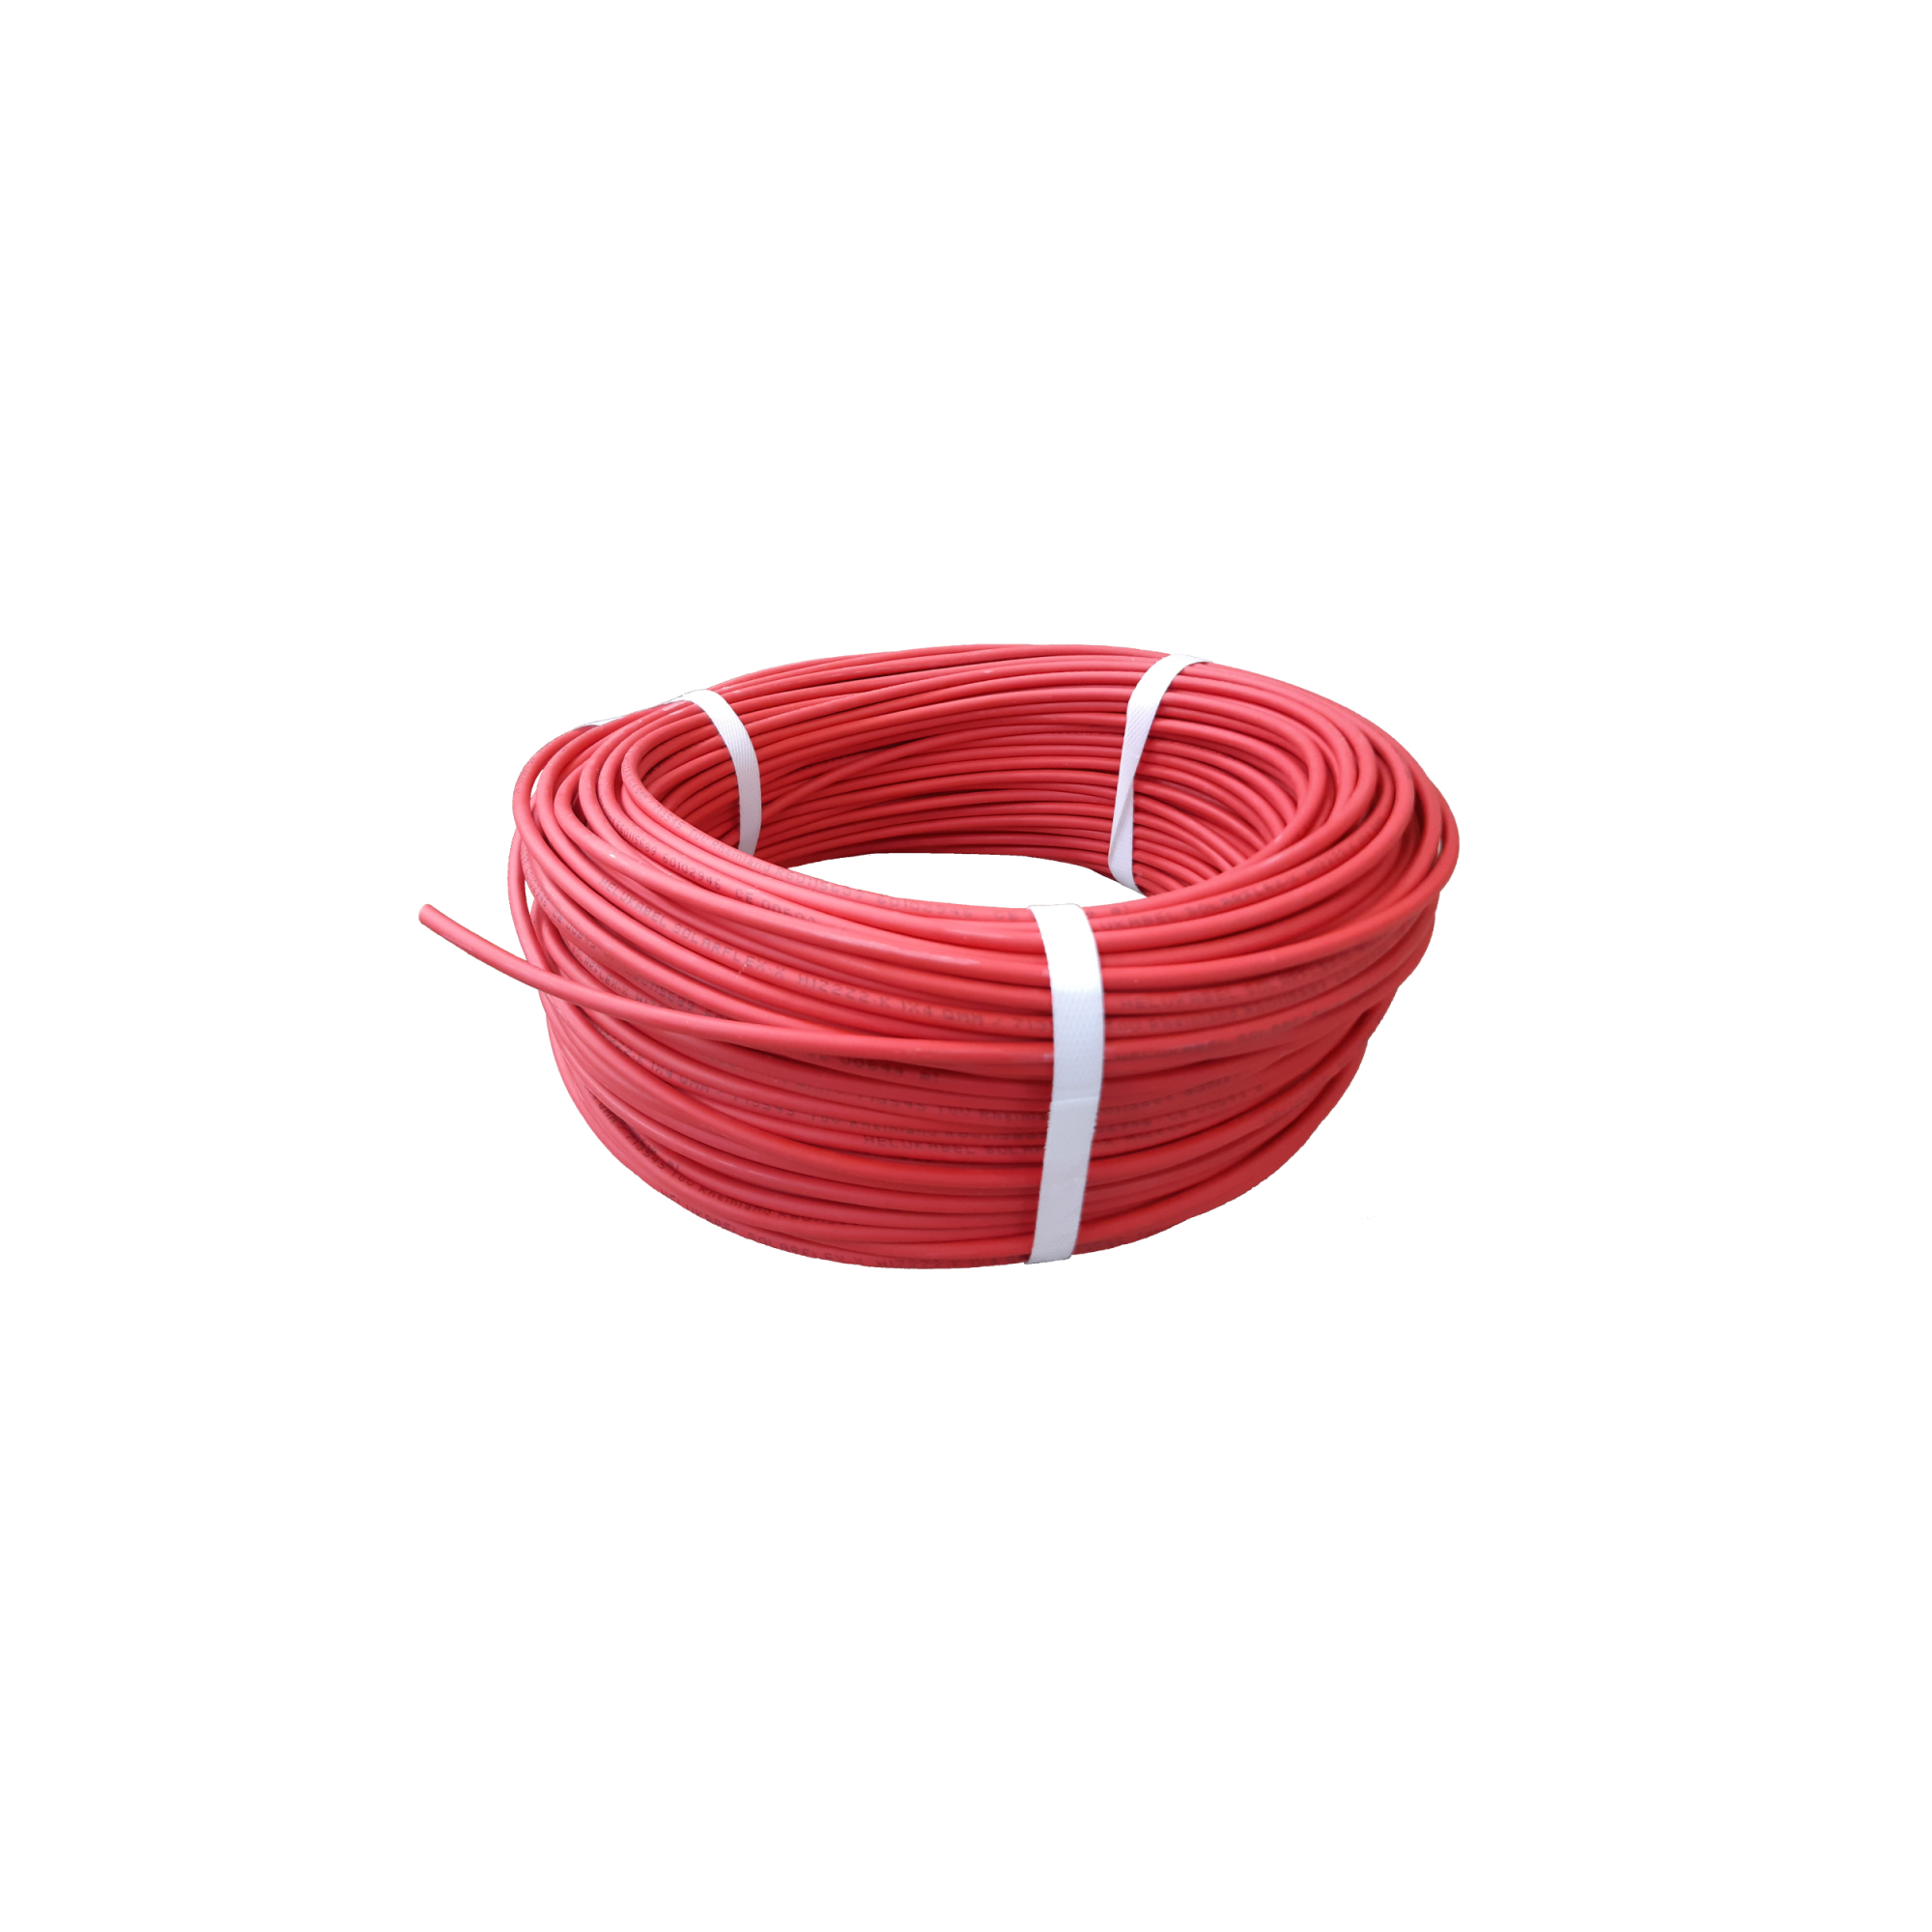 Red solar cable 6 mm2 -100 m